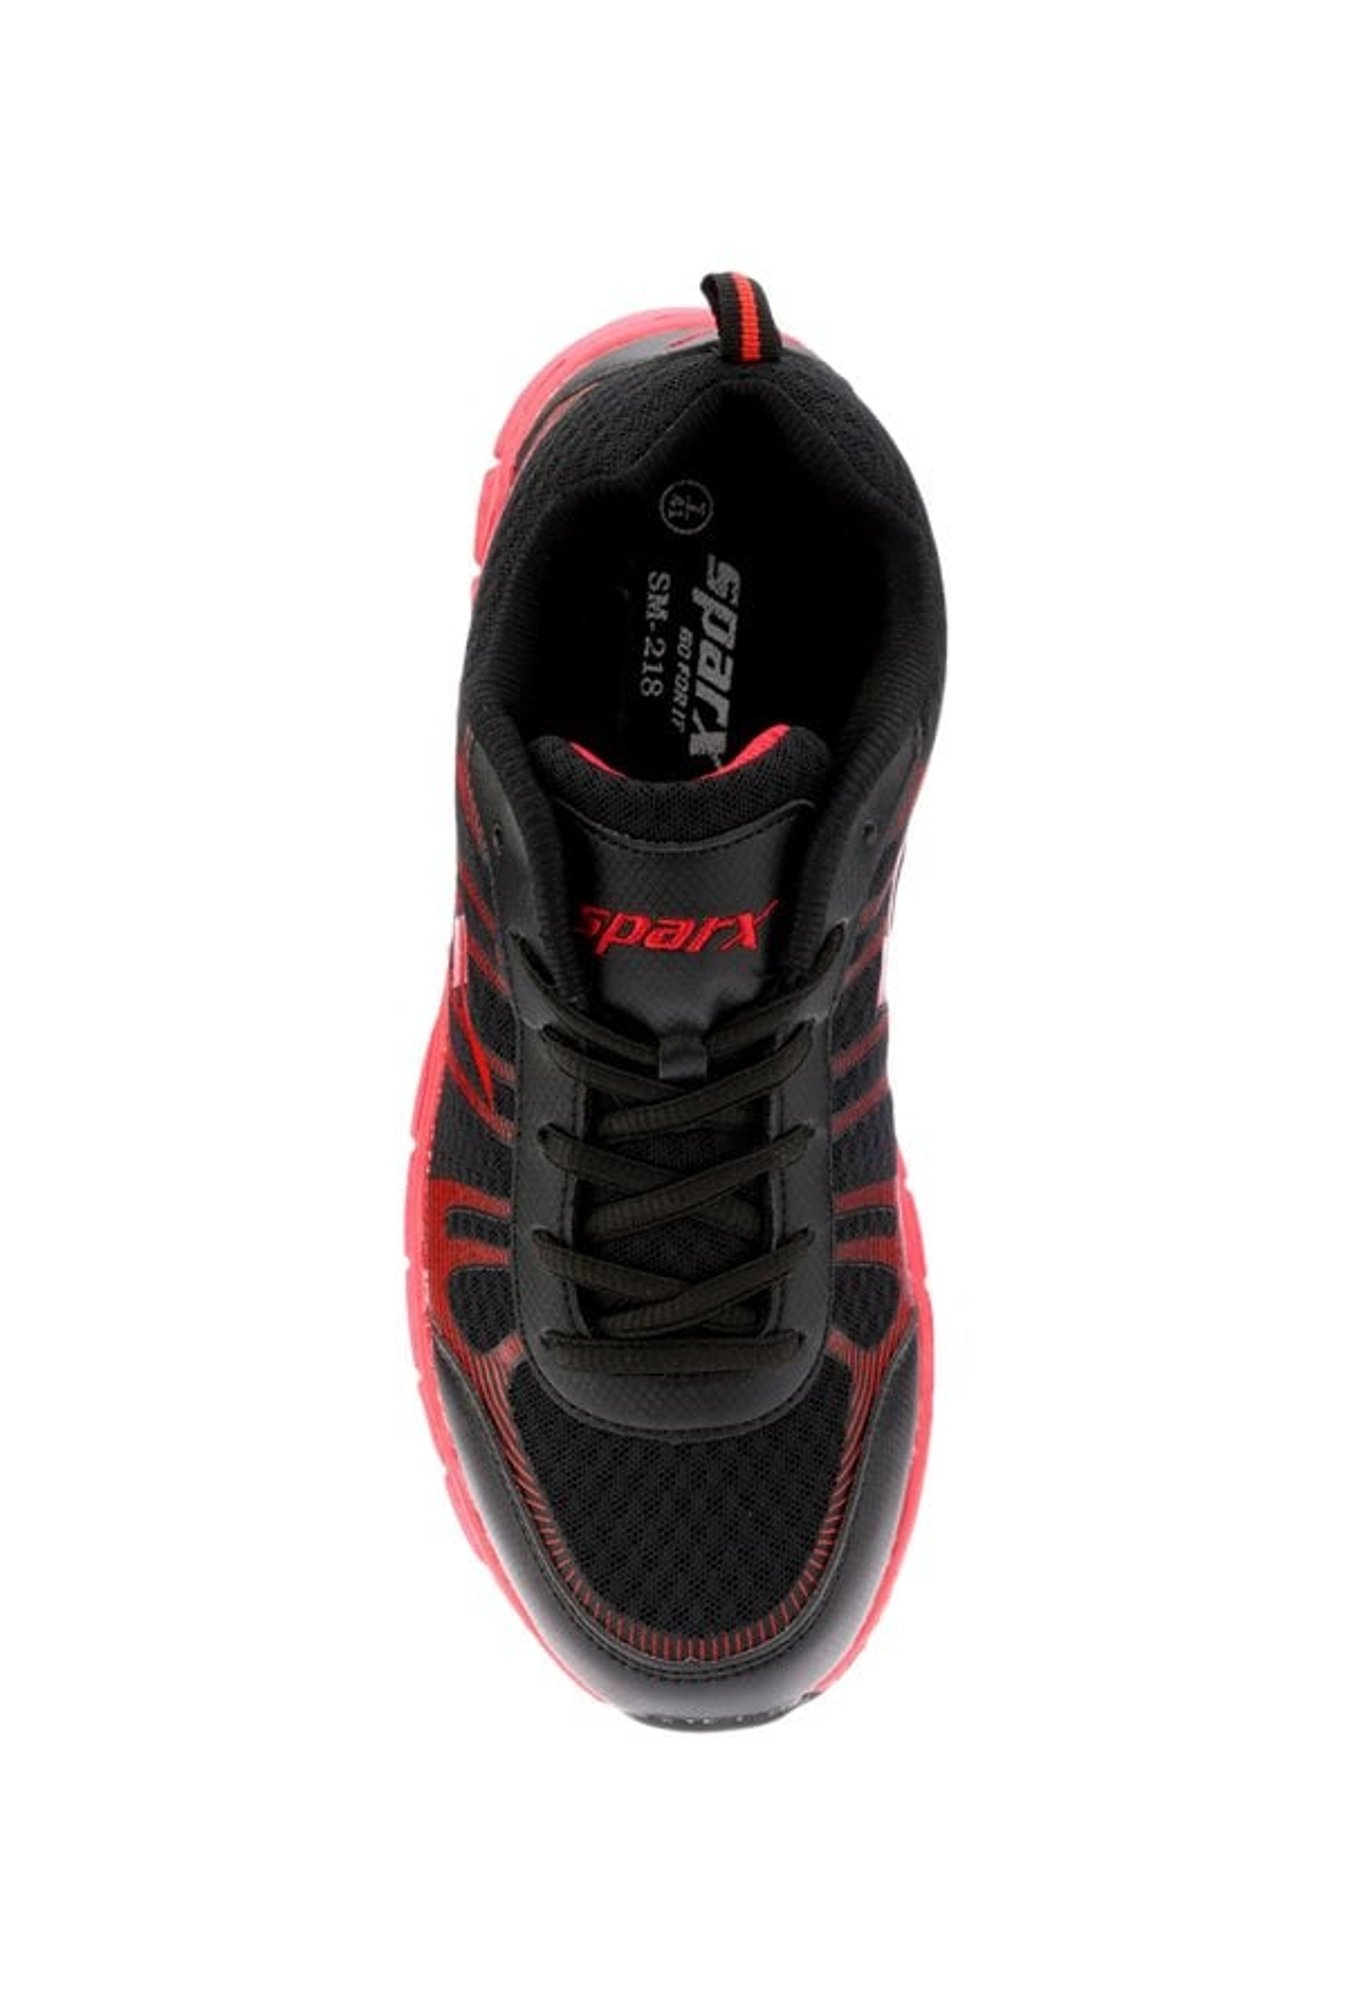 sparx sports shoes new model 218